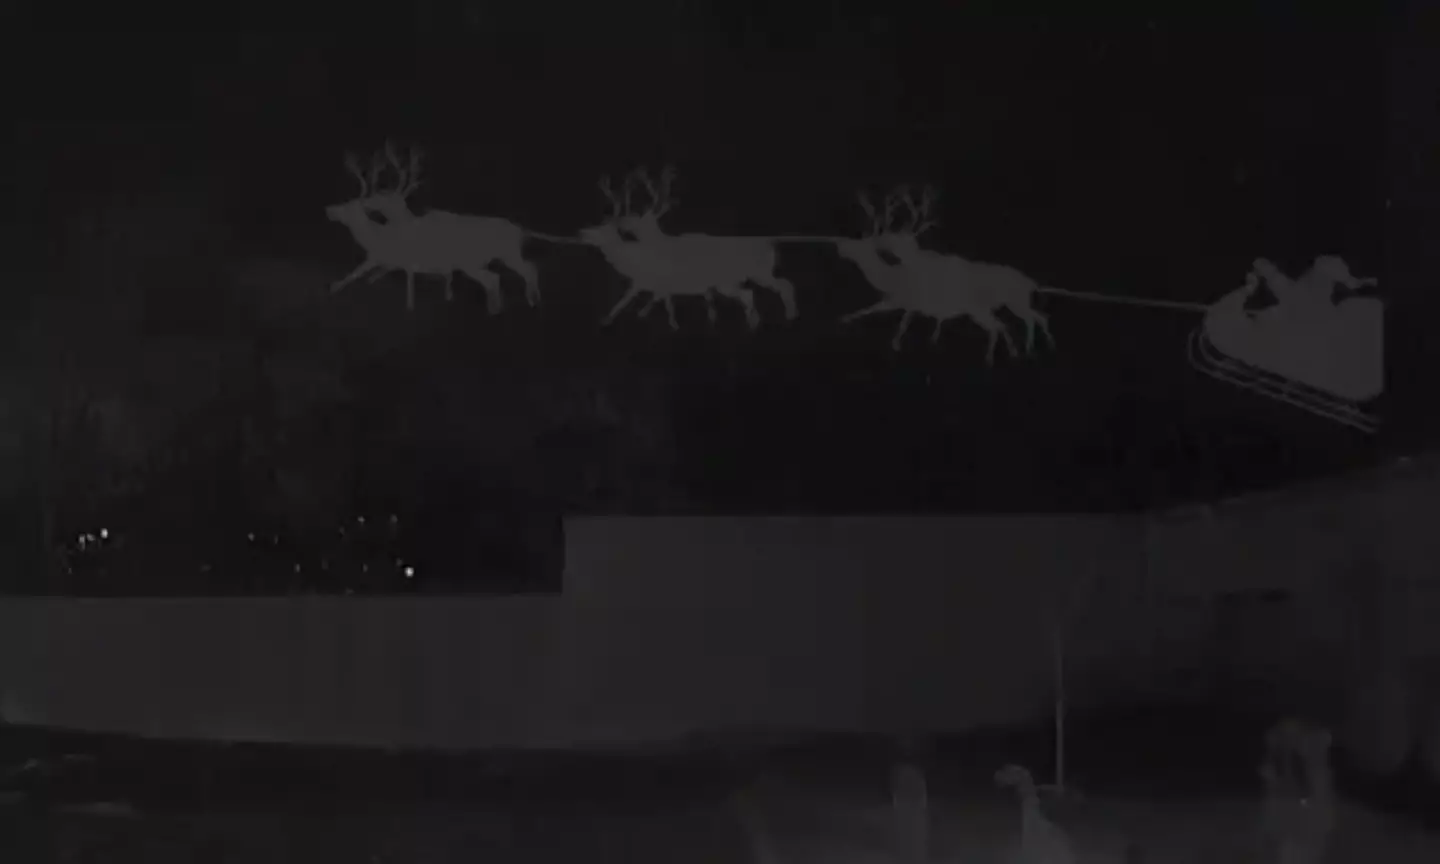 The edited picture showed Santa flying through the air.